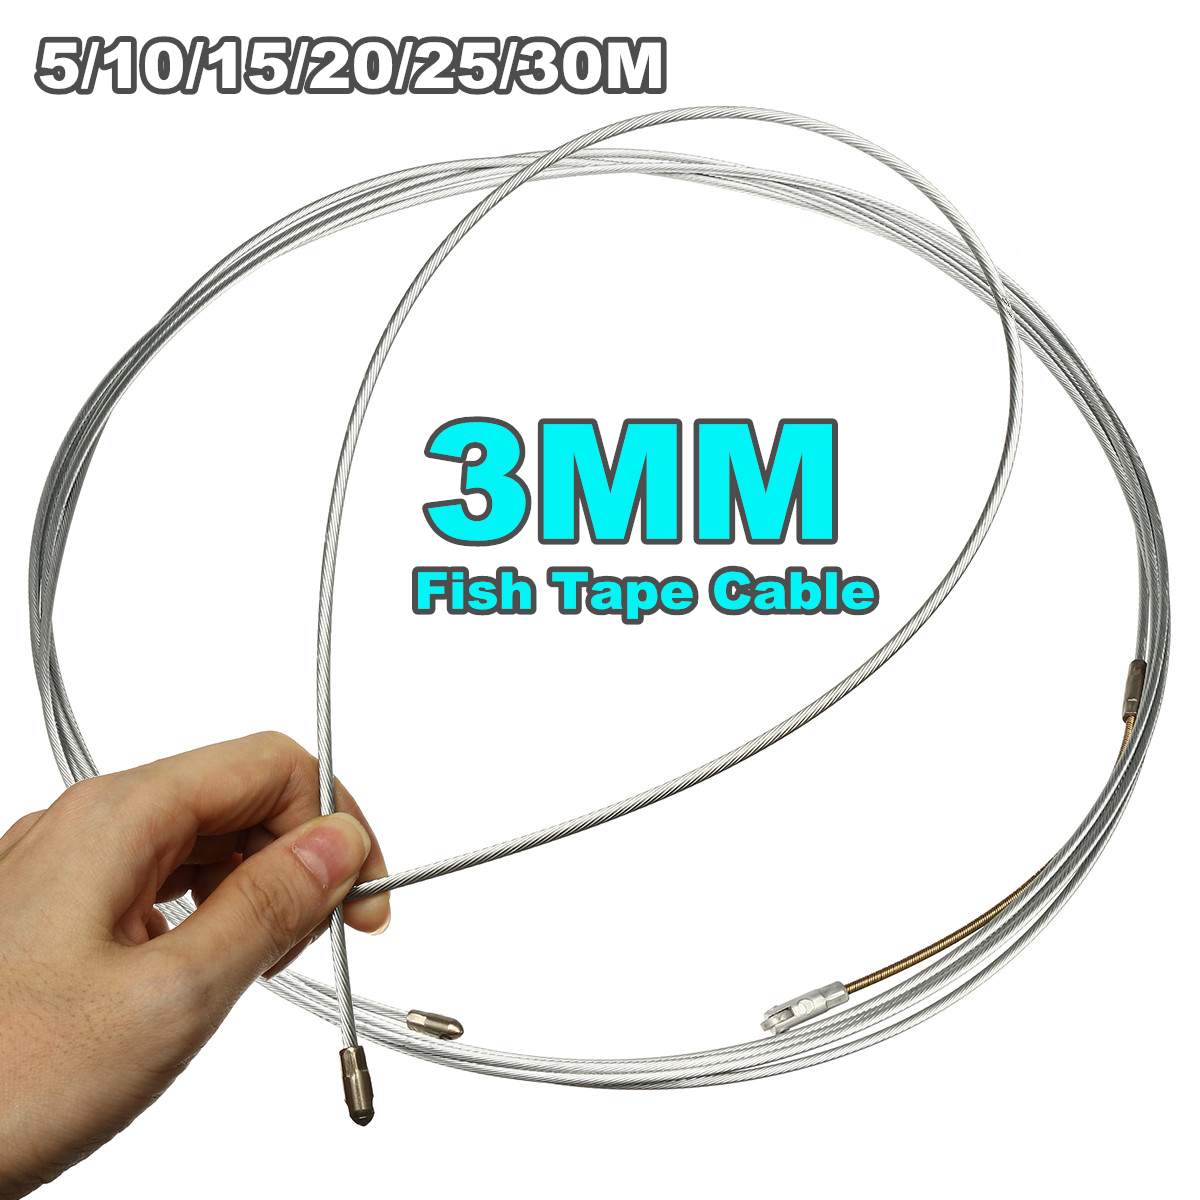 3mm 5/10/15/20/25/30M Flexible Steel Cable Push Puller Fish Tape Conduit Rodder Ducting Wire Holder Running Rods Electrical Cord